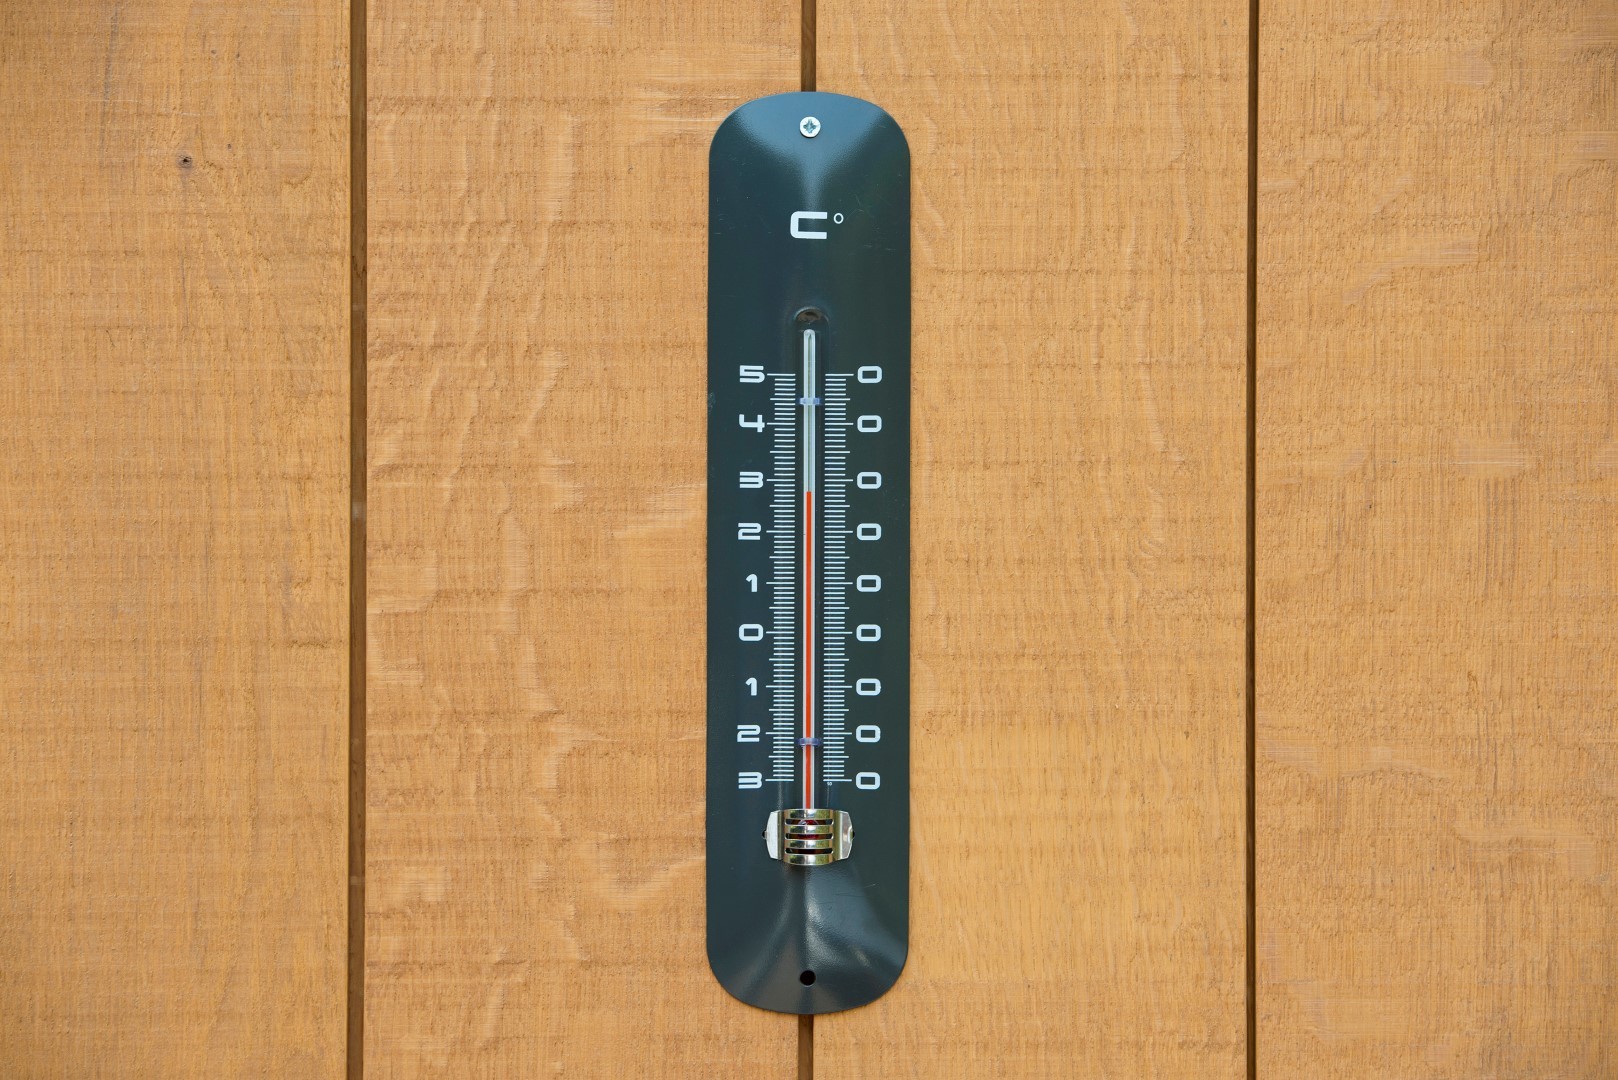 https://www.warentuin.nl/media/catalog/product/1/7/1778711338800591_3_nature_thermometer_muurthermometer_metaal_antraciet_30x6_5x1_3a25.jpg